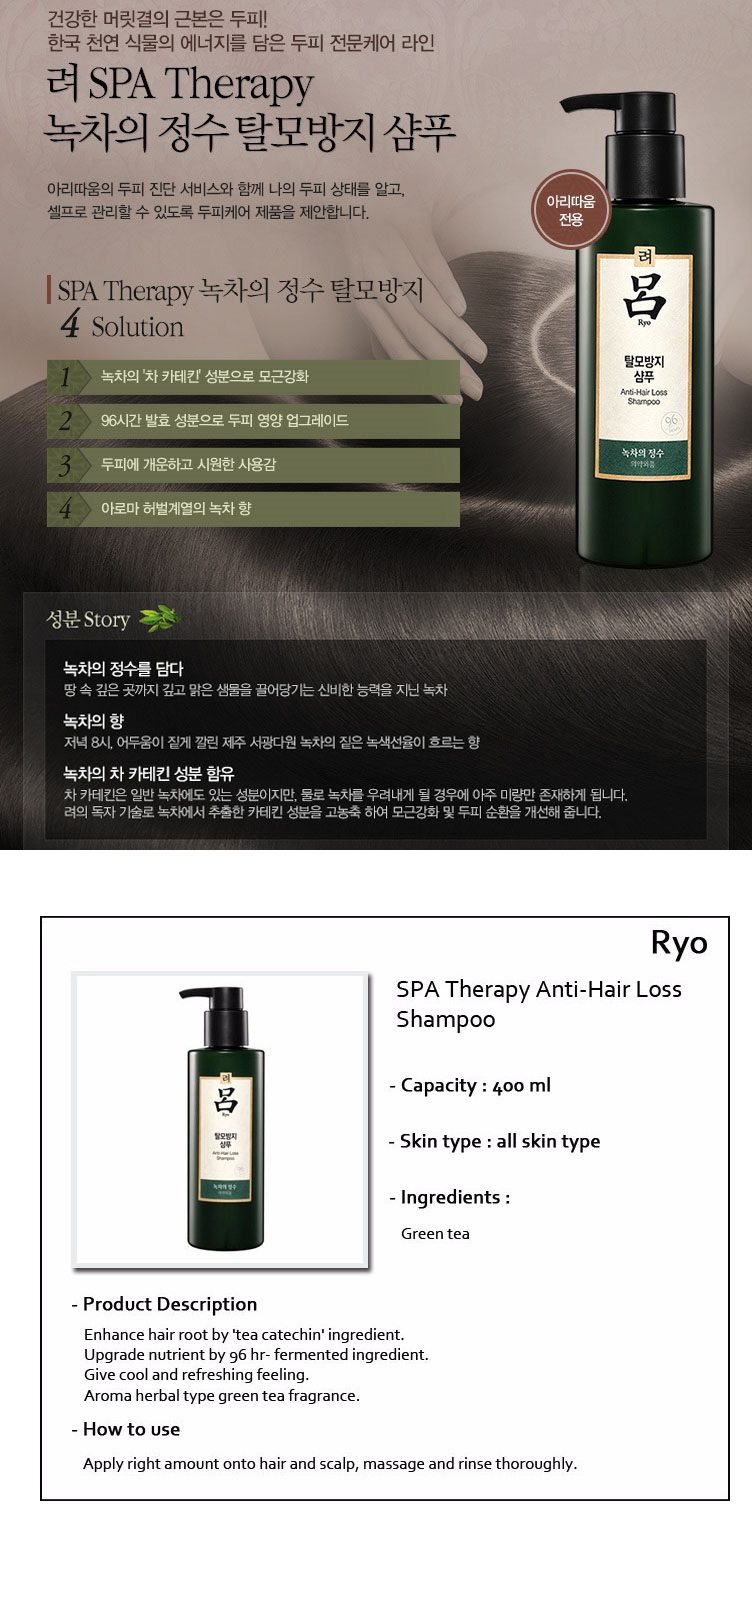 RYO SPA Therapy Anti Hair Loss Shampoo – best Korean skincare product  MalaysiaSEOUL NEXT BY YOU